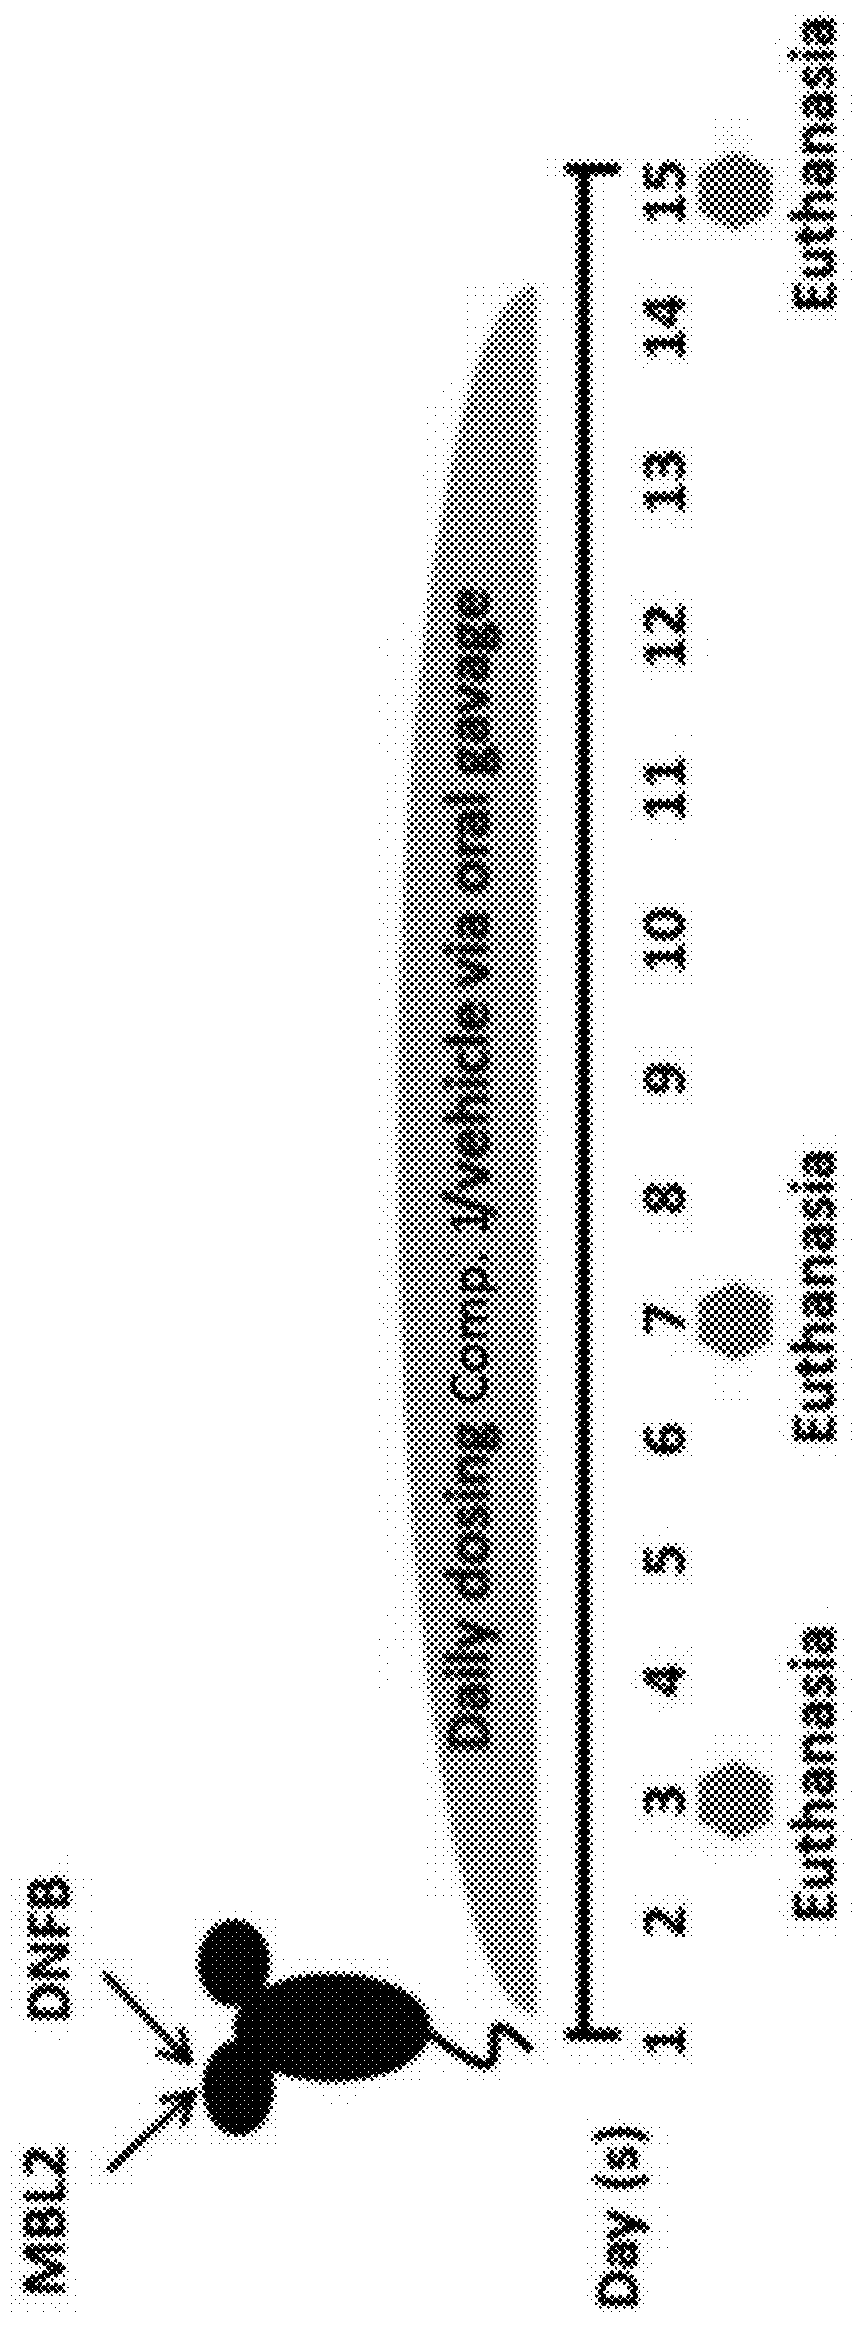 Methods of treating solid tumors with ccr2 antagonists